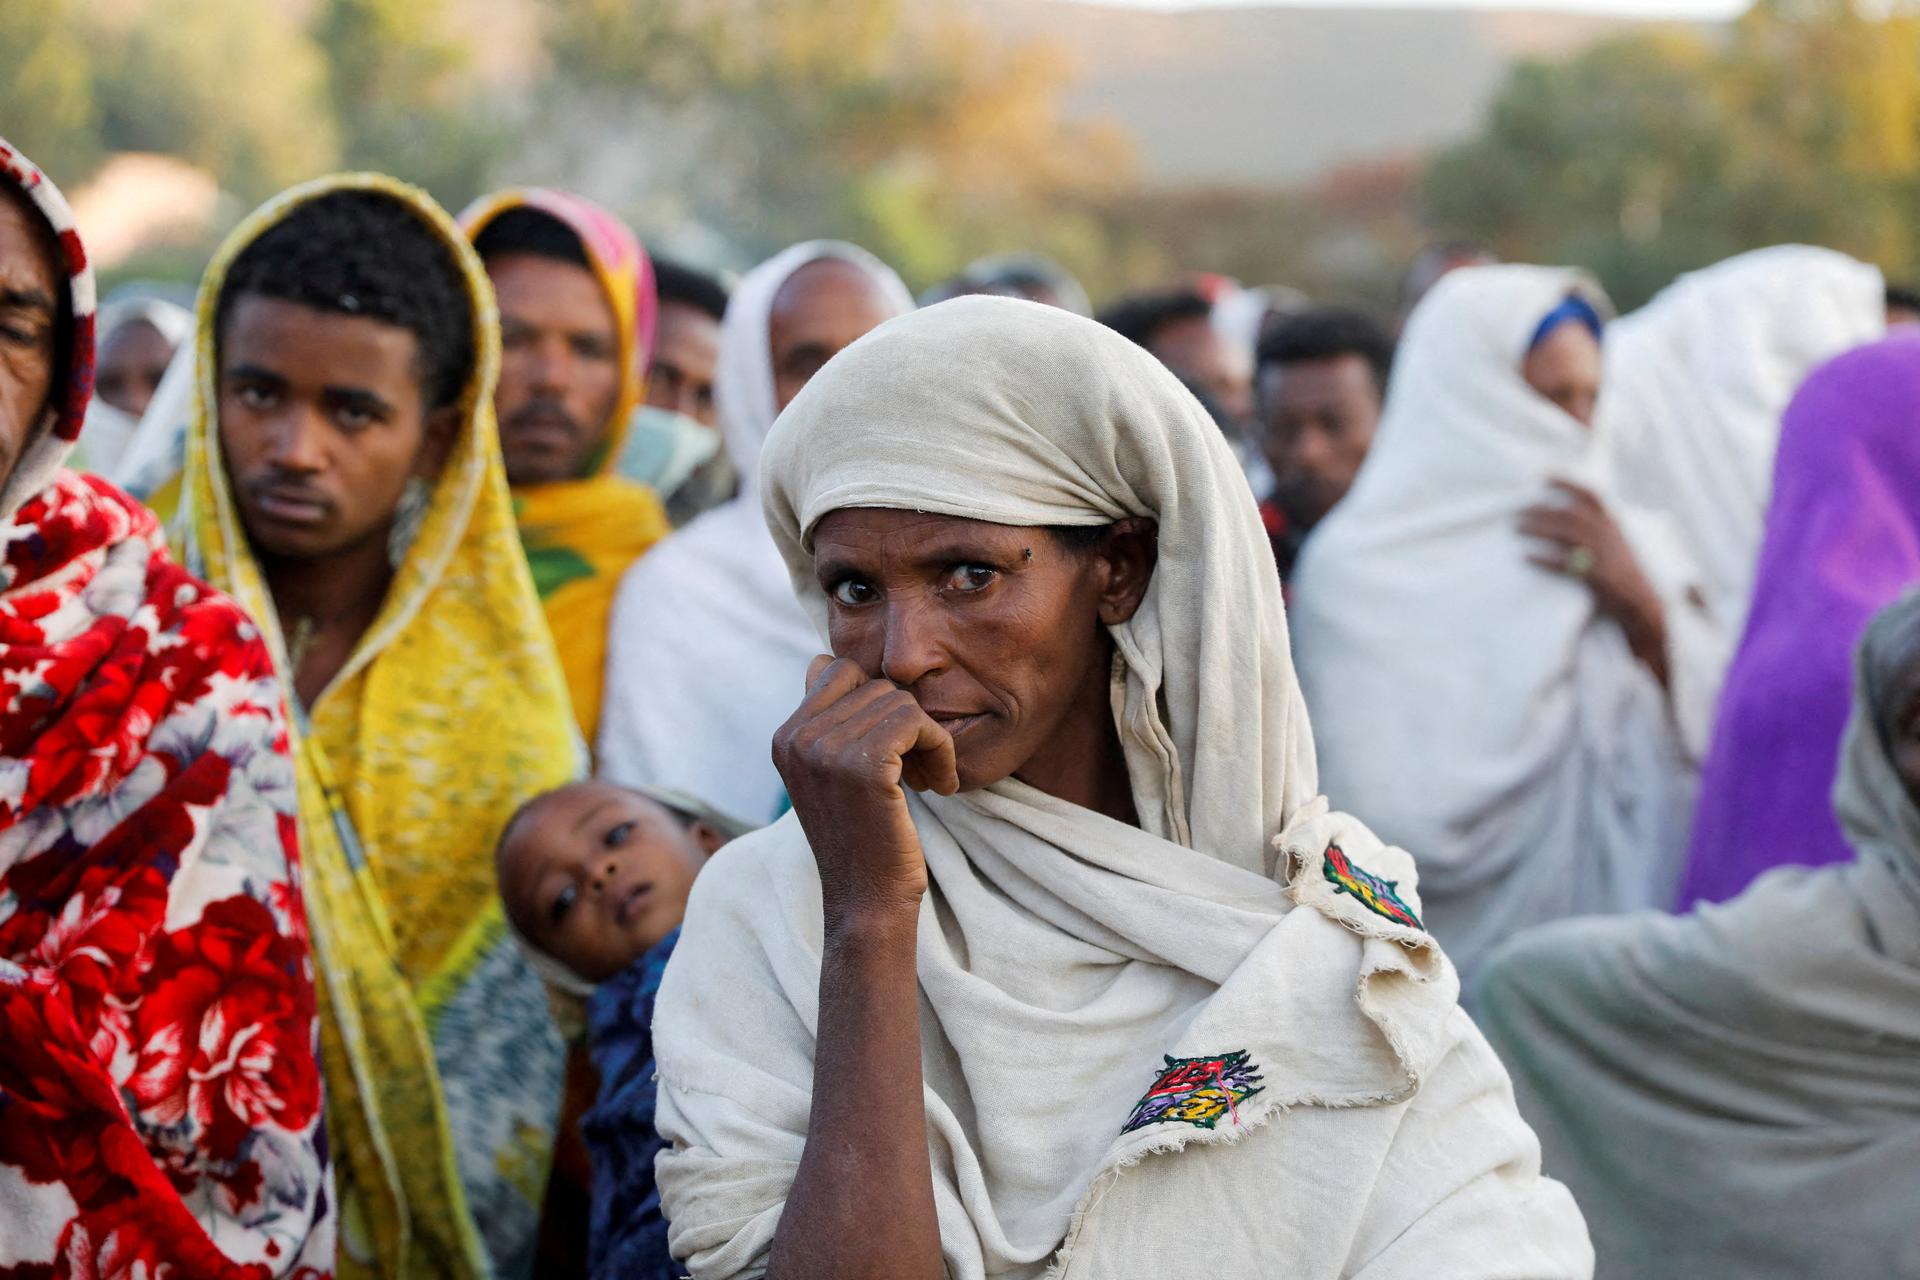 New report highlights Tigray atrocities, says Ethiopia could face famine